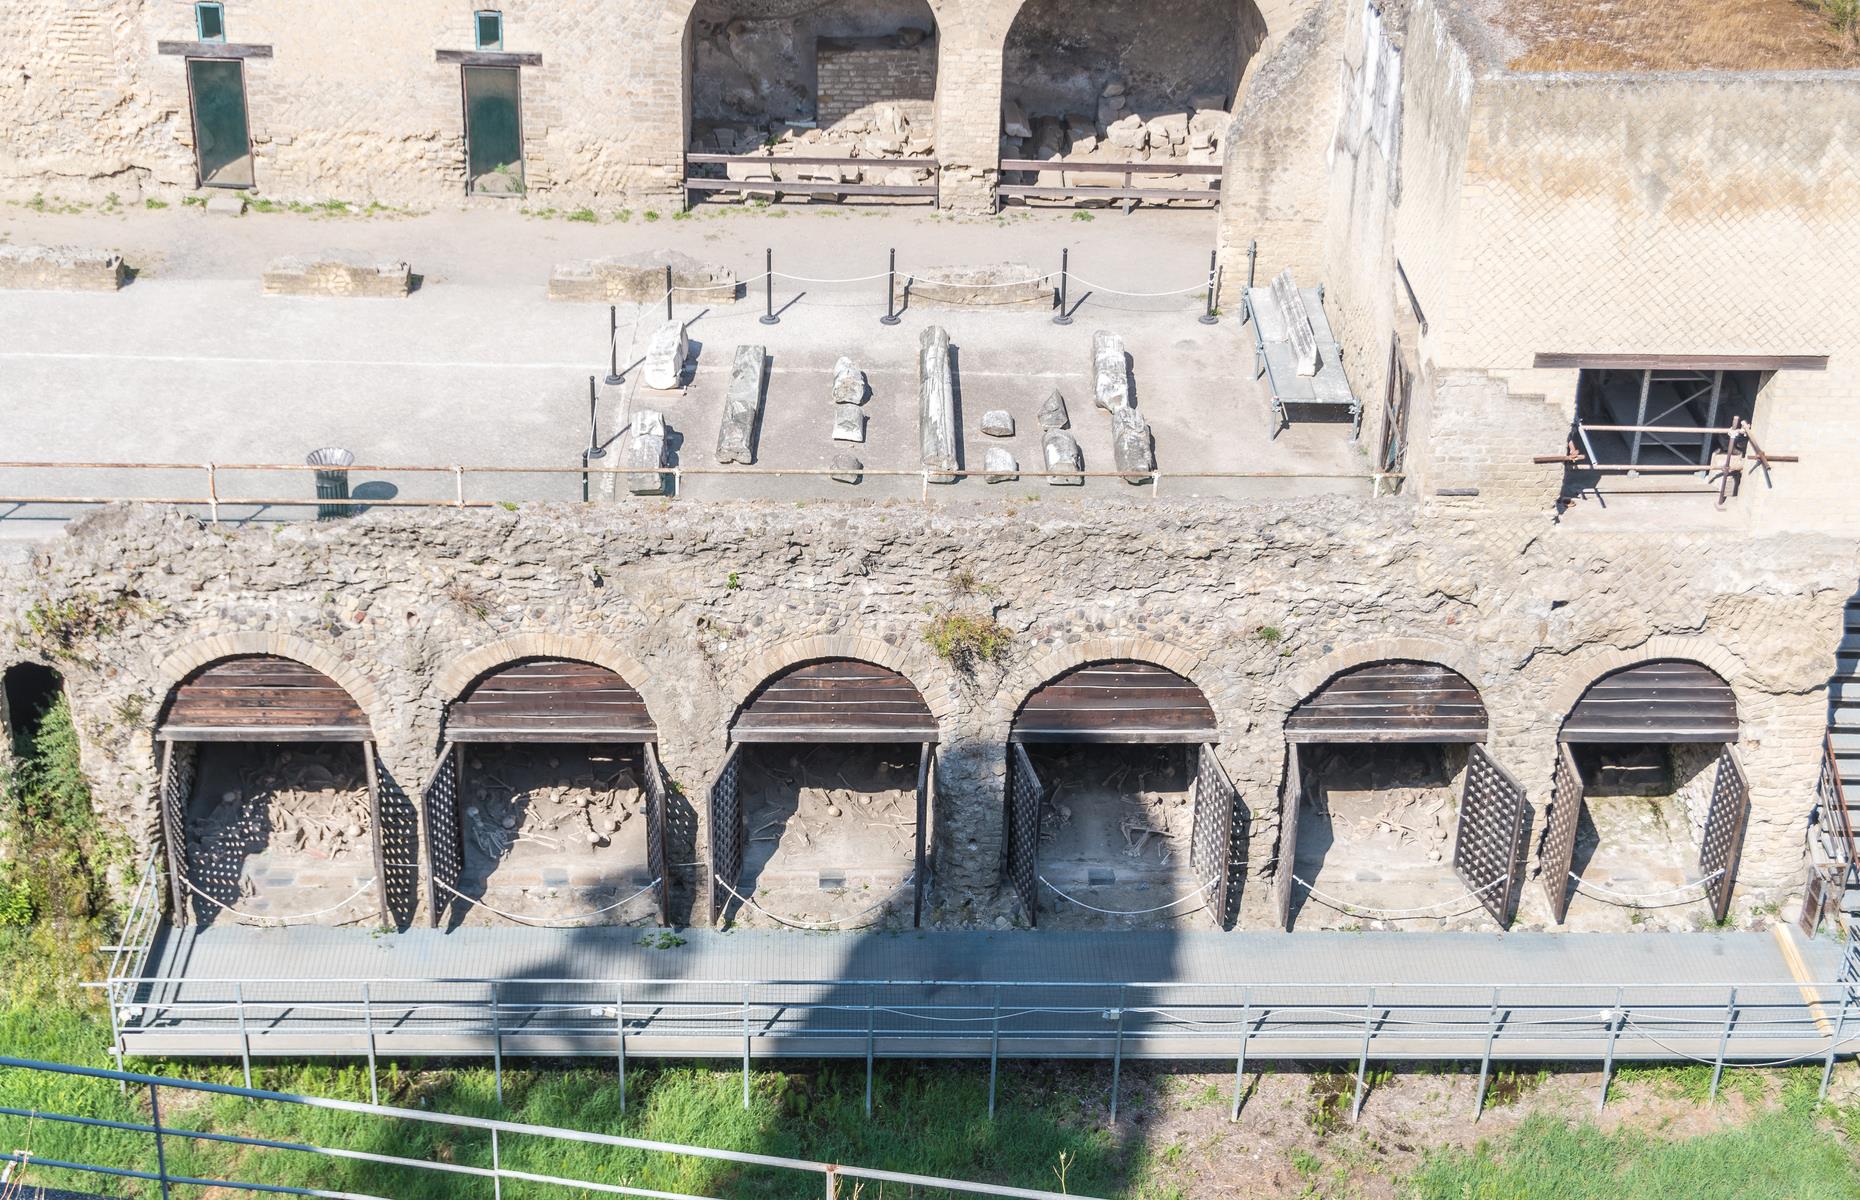 <p>Fascinating discoveries were made at the ancient Roman town of Herculaneum, near Pompeii, in October 2021, during the first archaeological dig on the site in almost three decades. <a href="https://www.ansa.it/english/news/2021/10/15/sensational-fugitive-skeleton-found-at-herculaneum_9dc02abd-c1c3-4477-b2f4-7b46c64ce928.html">The remains of a man</a> were found just steps from what would have been the ancient town’s beach (pictured). The mud-encased skeleton was surrounded by carbonised wood, including a roof beam that may well have collapsed on him as he tried to escape the catastrophic eruption of Mount Vesuvius in AD 79.</p>